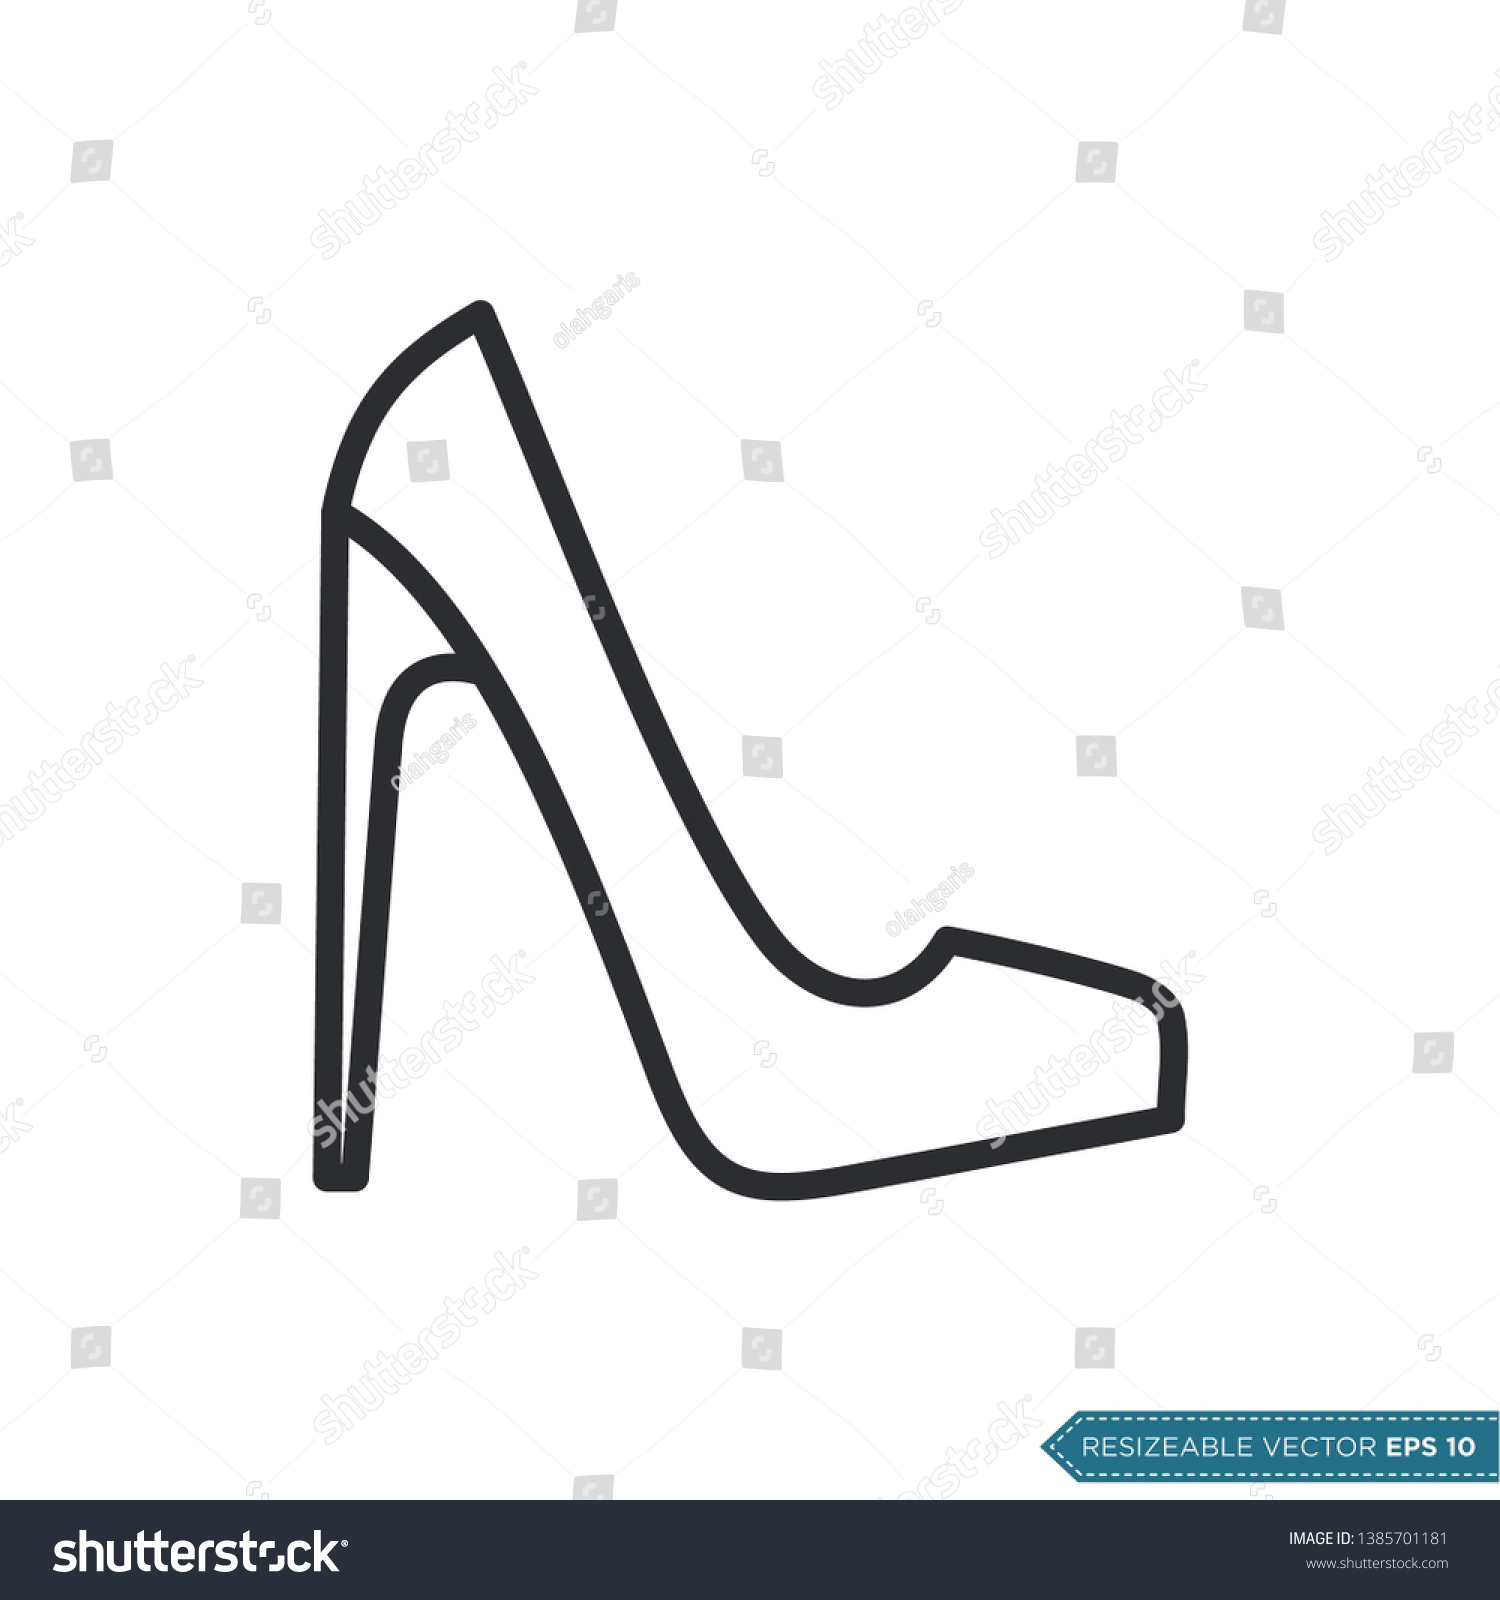 High Heels Women Shoe Icon Vector Stock Vector (Royalty Free With Regard To High Heel Template For Cards